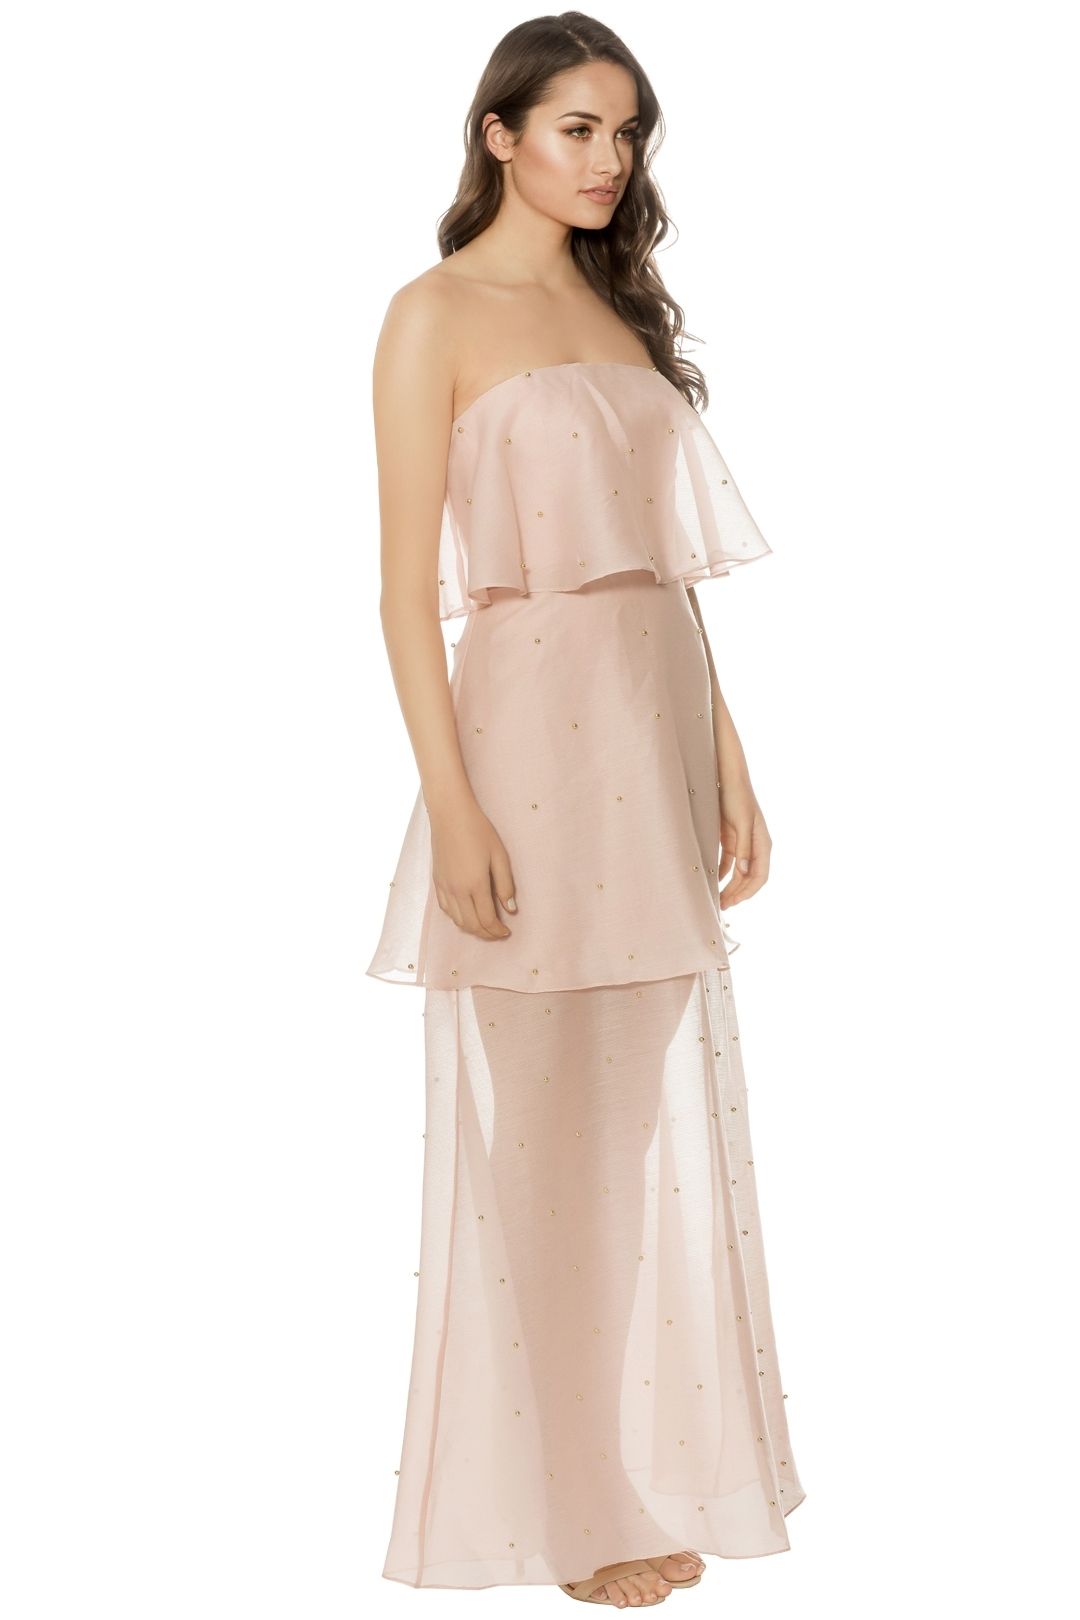 Keepsake The Label - Call Me Gown - Blush - Side